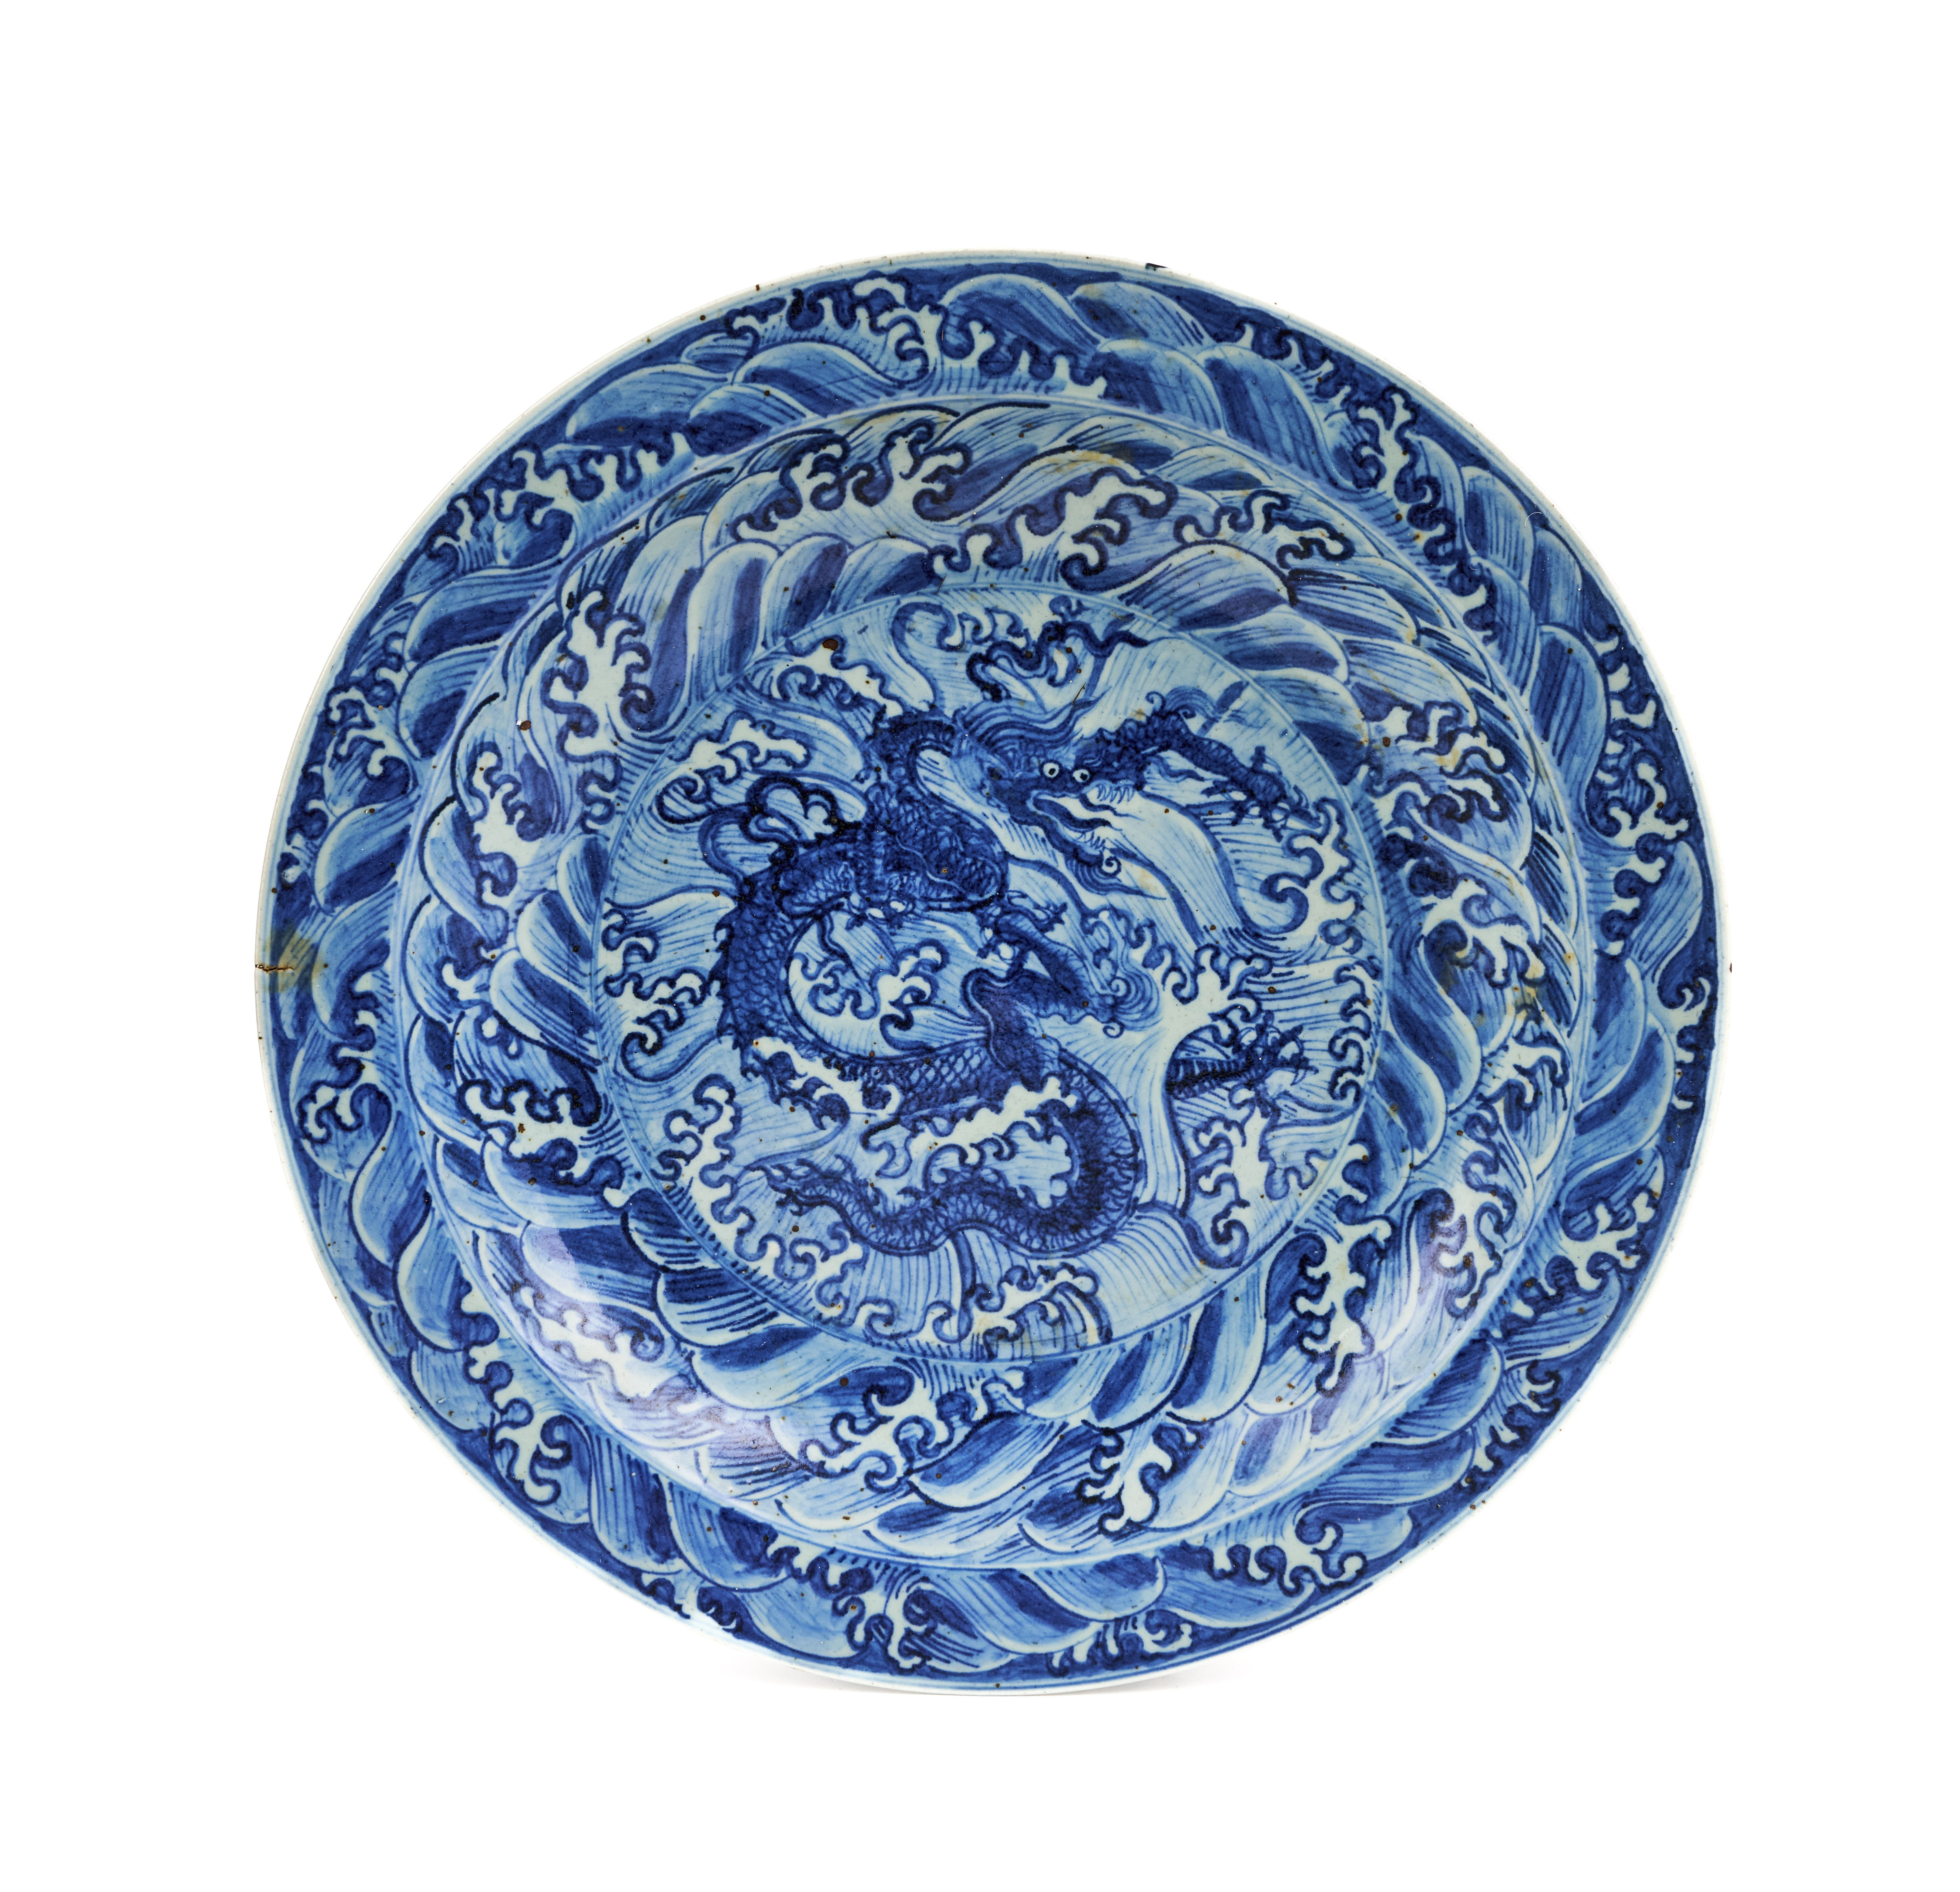 A LARGE CHINESE BLUE & WHITE CHARGER, QING DYNASTY (1644-1911)